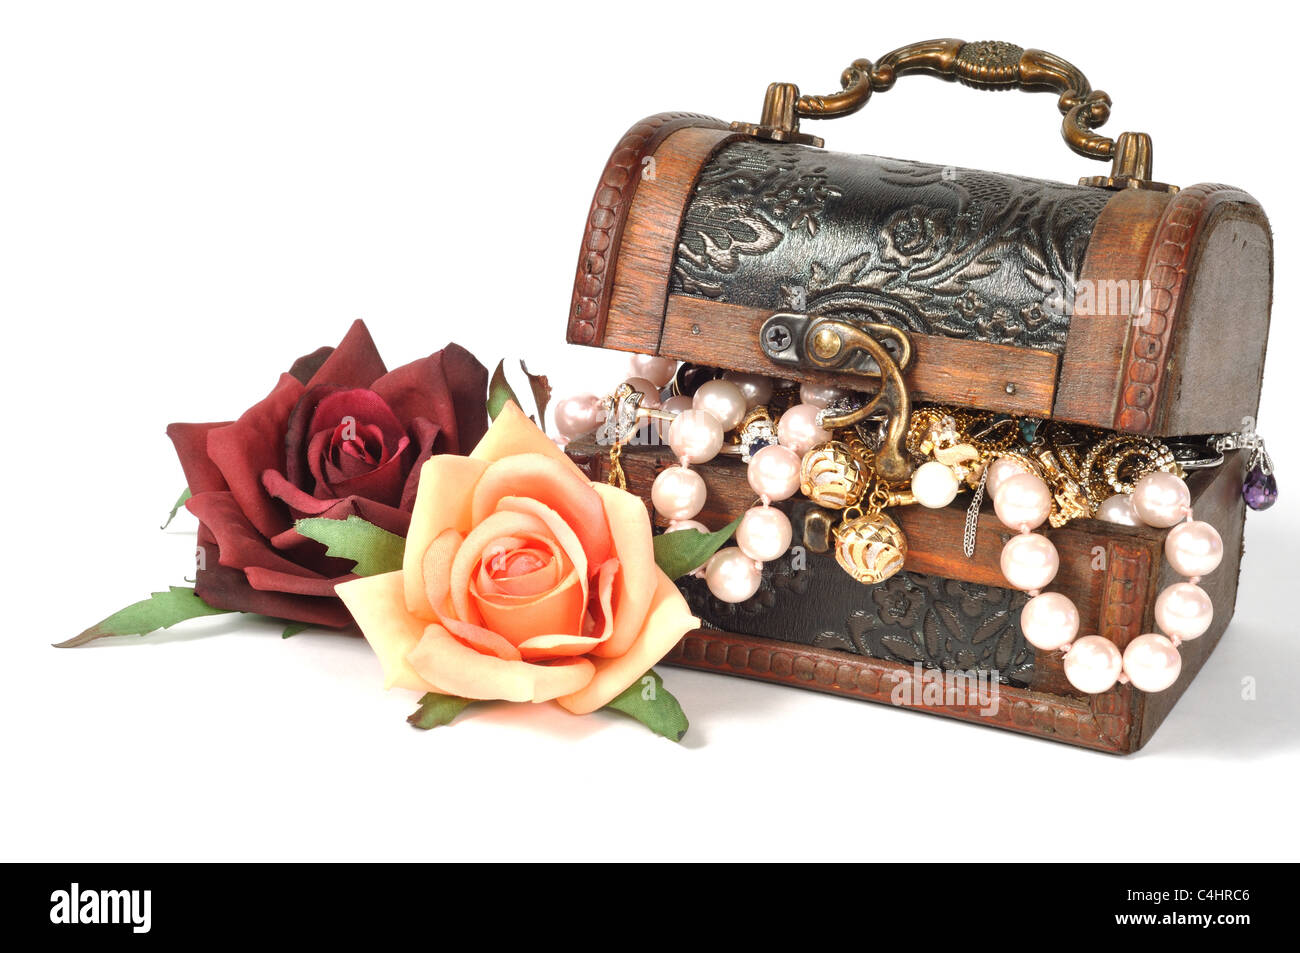 Wooden chest full of gold jewelry, with roses Stock Photo